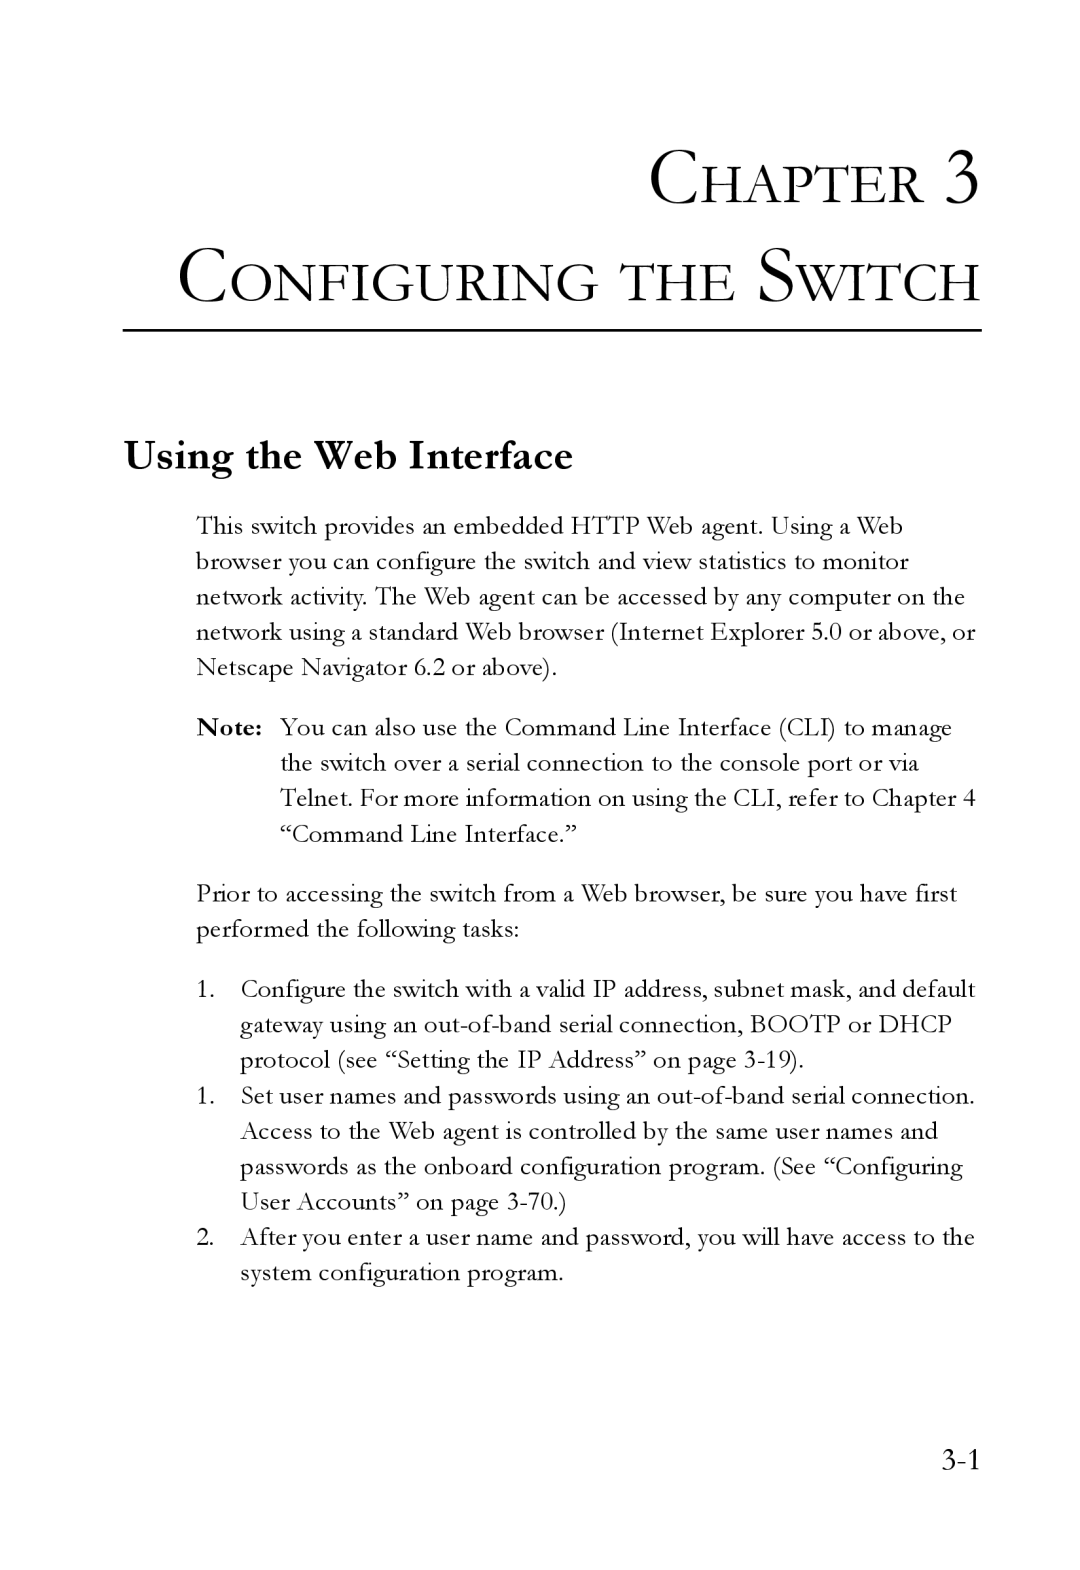 SMC Networks SMC6824M manual Configuring the Switch, Using the Web Interface 